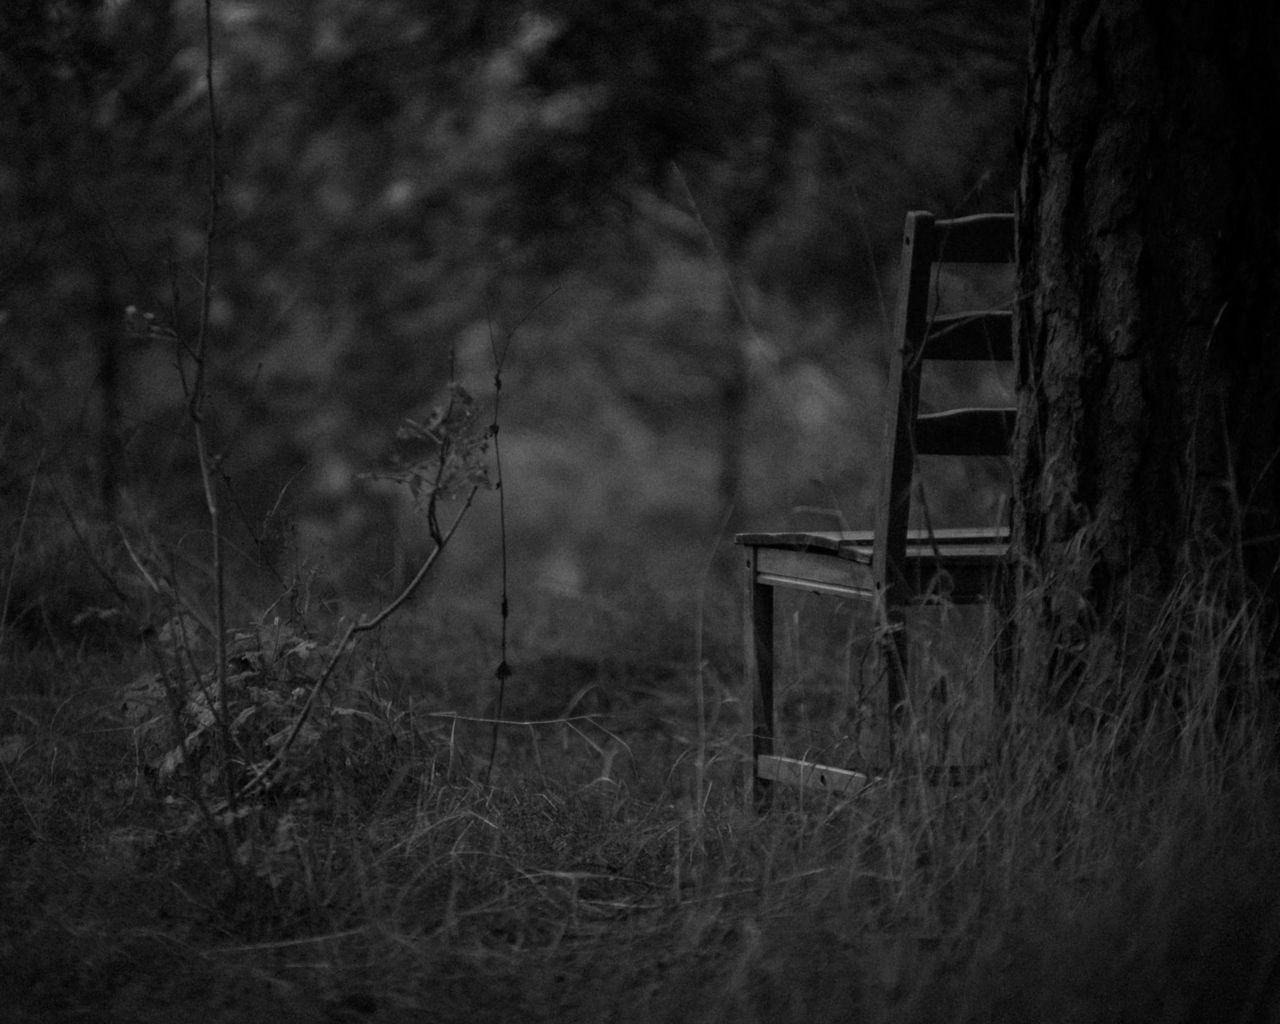 Download wallpaper 1280x1024 chair, bw, forest, grass, gloomy standard 5:4  hd background